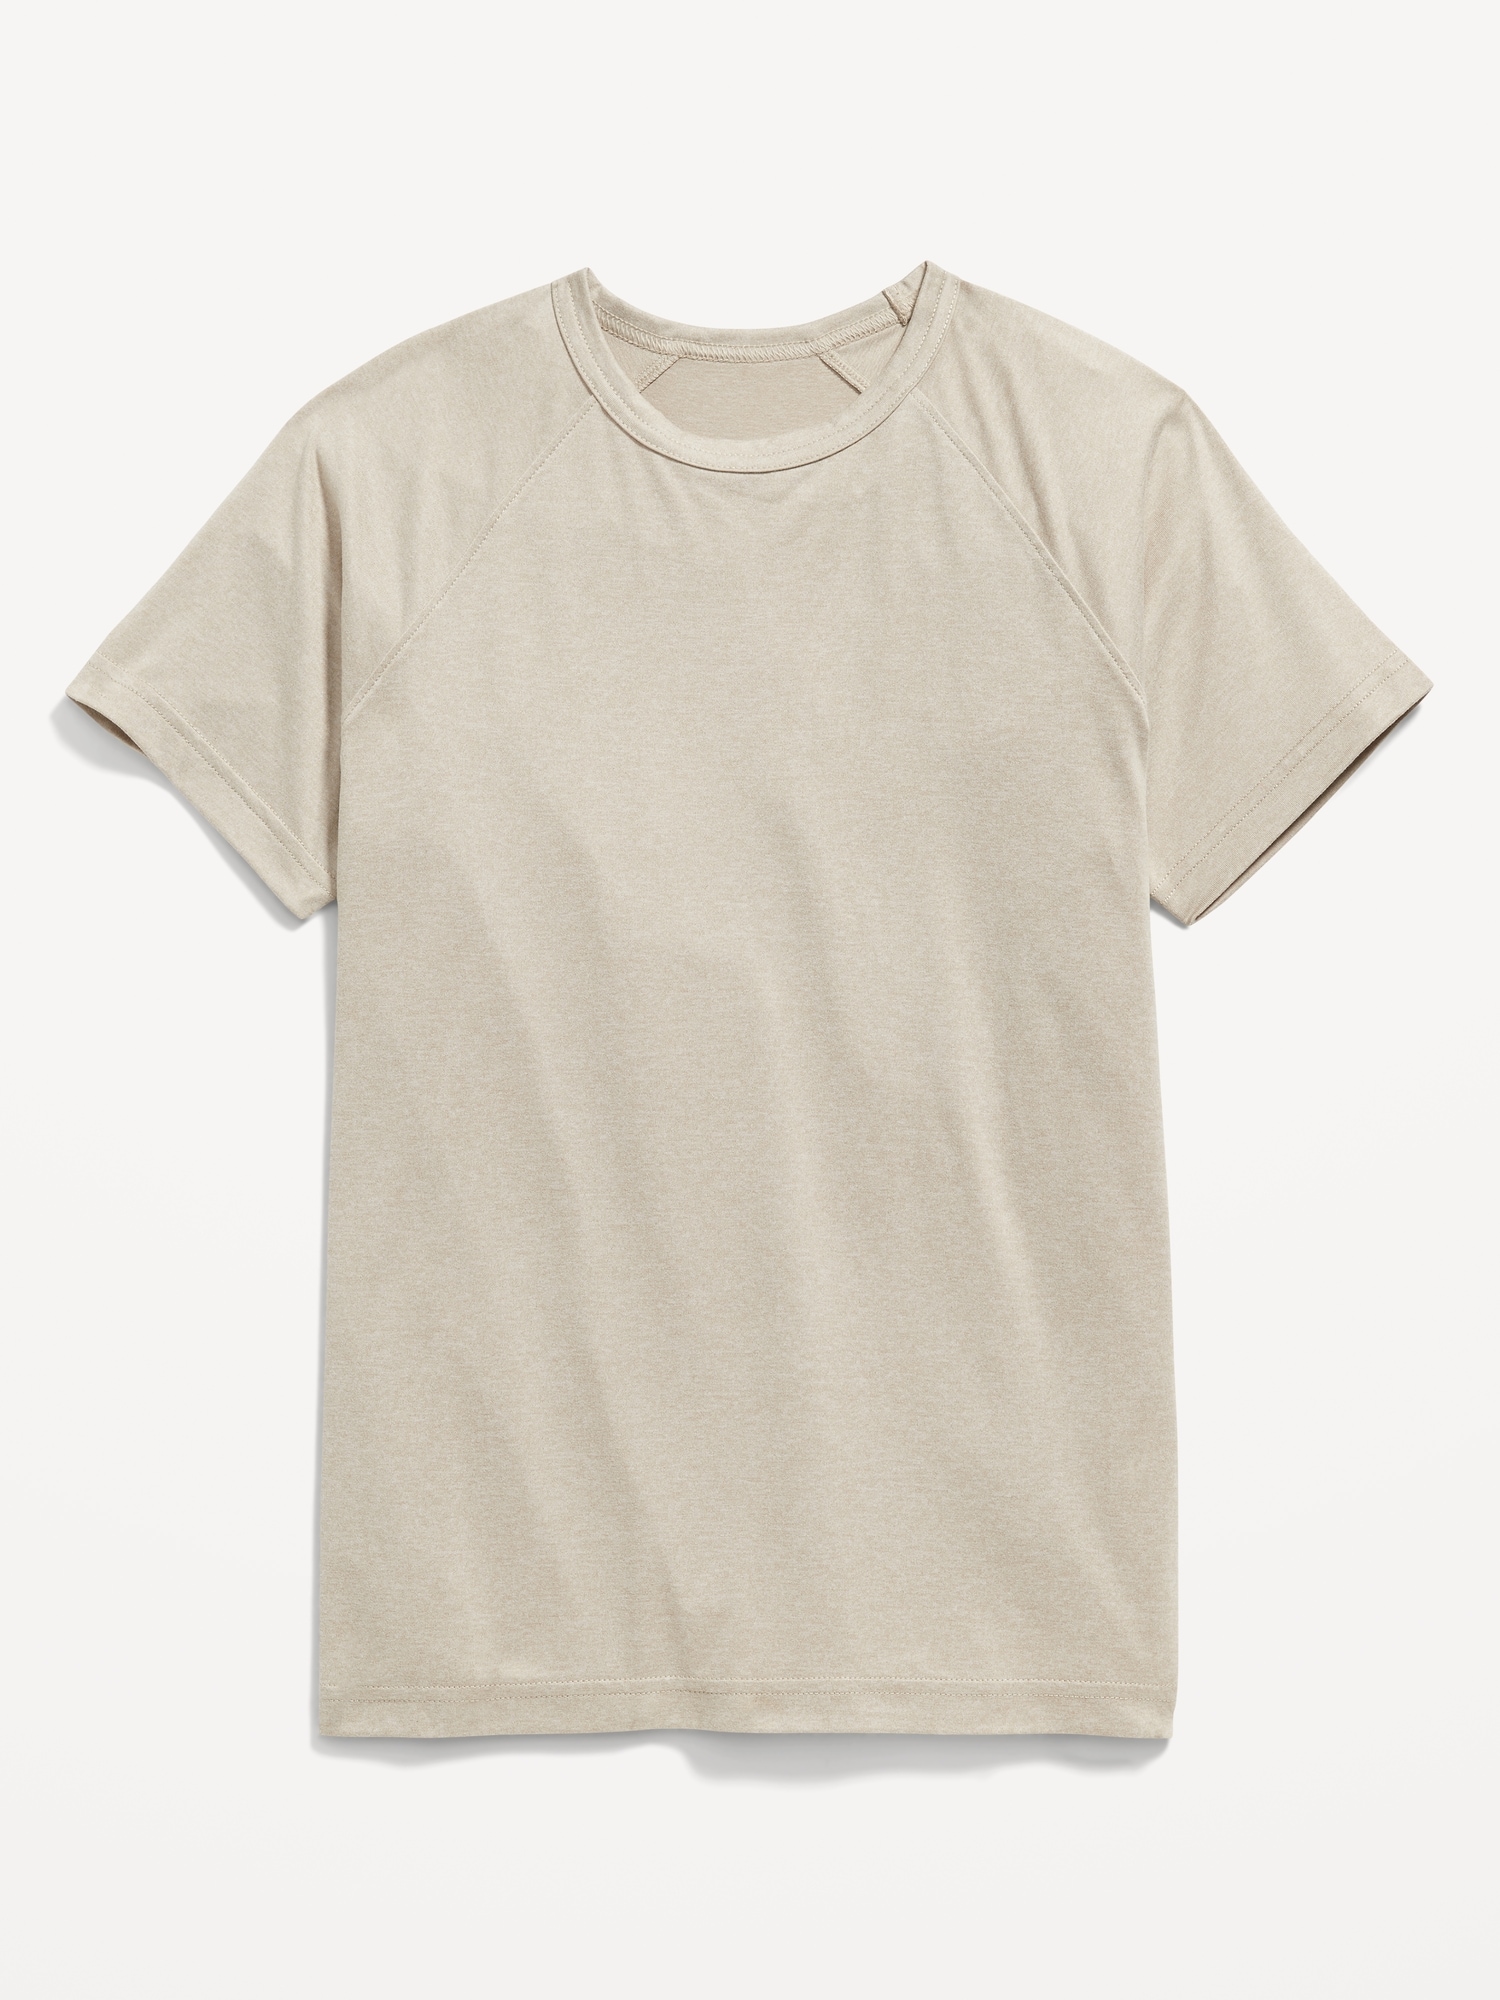 Old Navy Cloud 94 Soft Go-Dry Cool Performance T-Shirt for Boys beige. 1